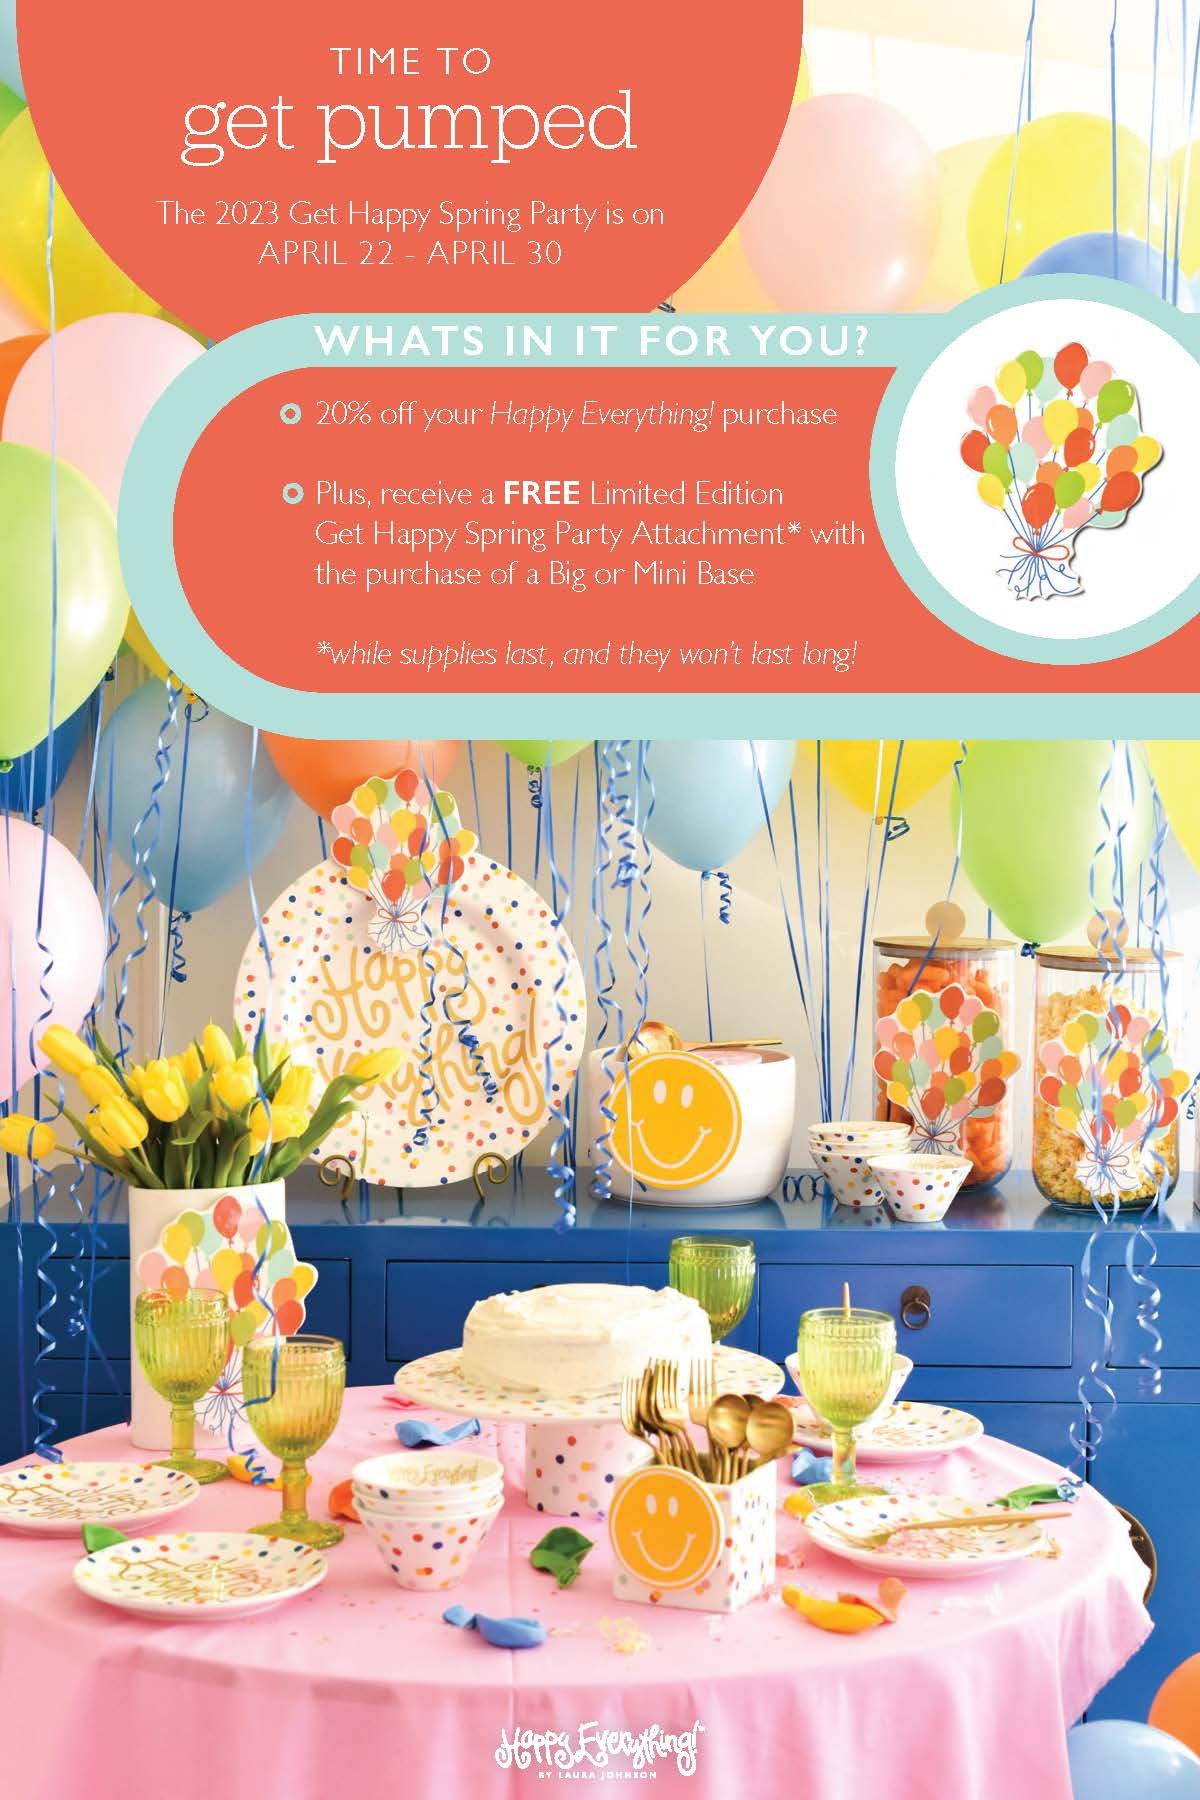 2023 - CAM - HEV-Printed Literature_Get Happy Spring Party_Promotion Sign_4x6.jpg